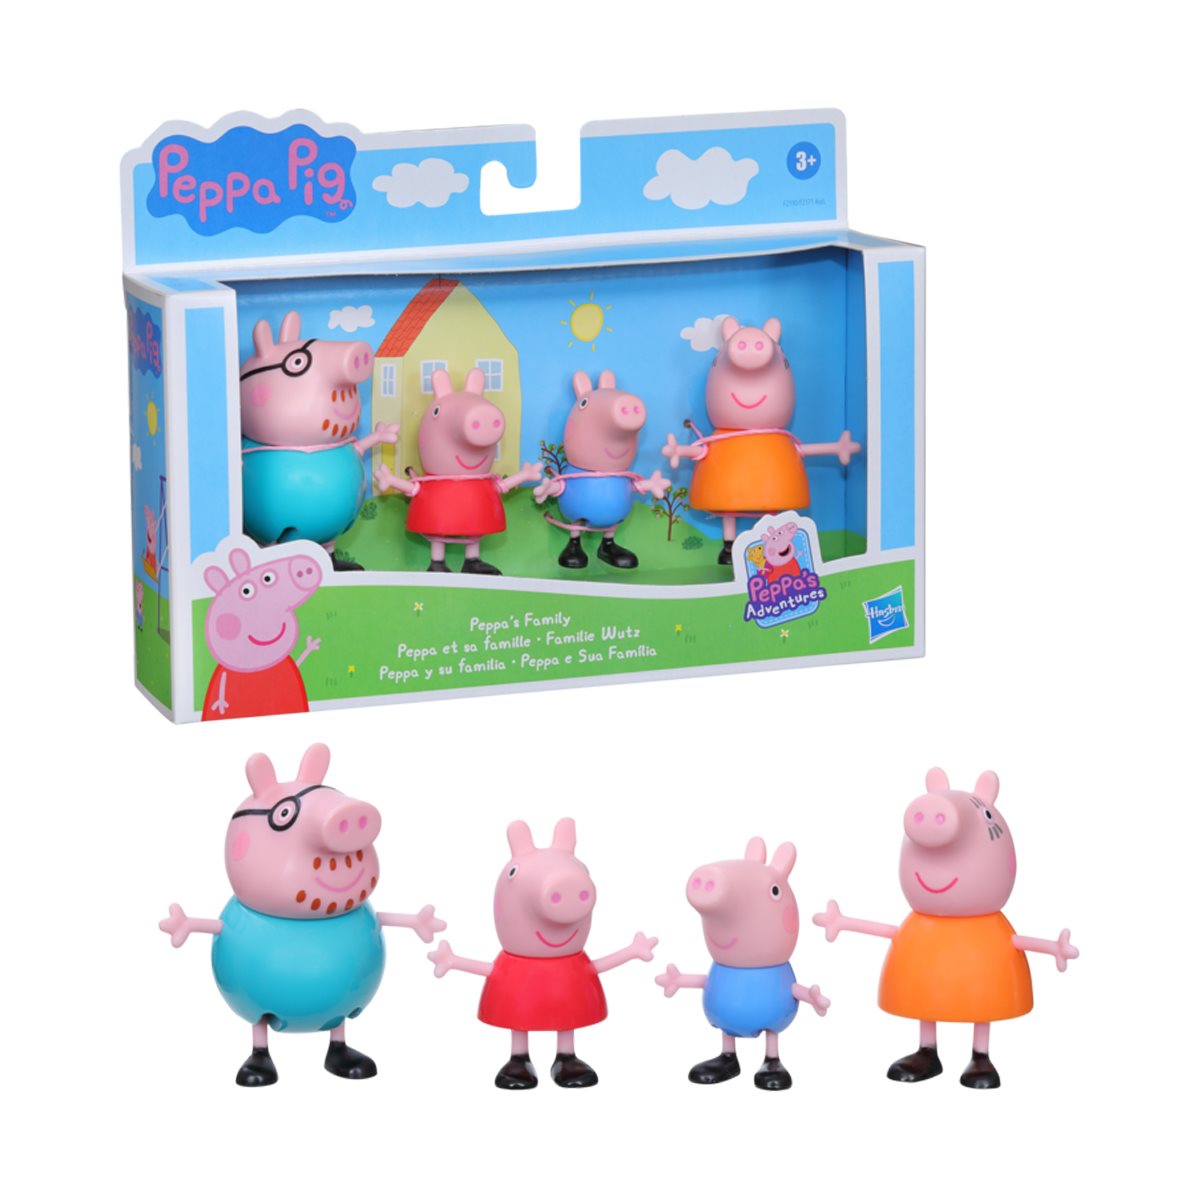 Peppa Pig Family Figures Pack of 4 Mummy Daddy Peppa Figurines Toy Set 